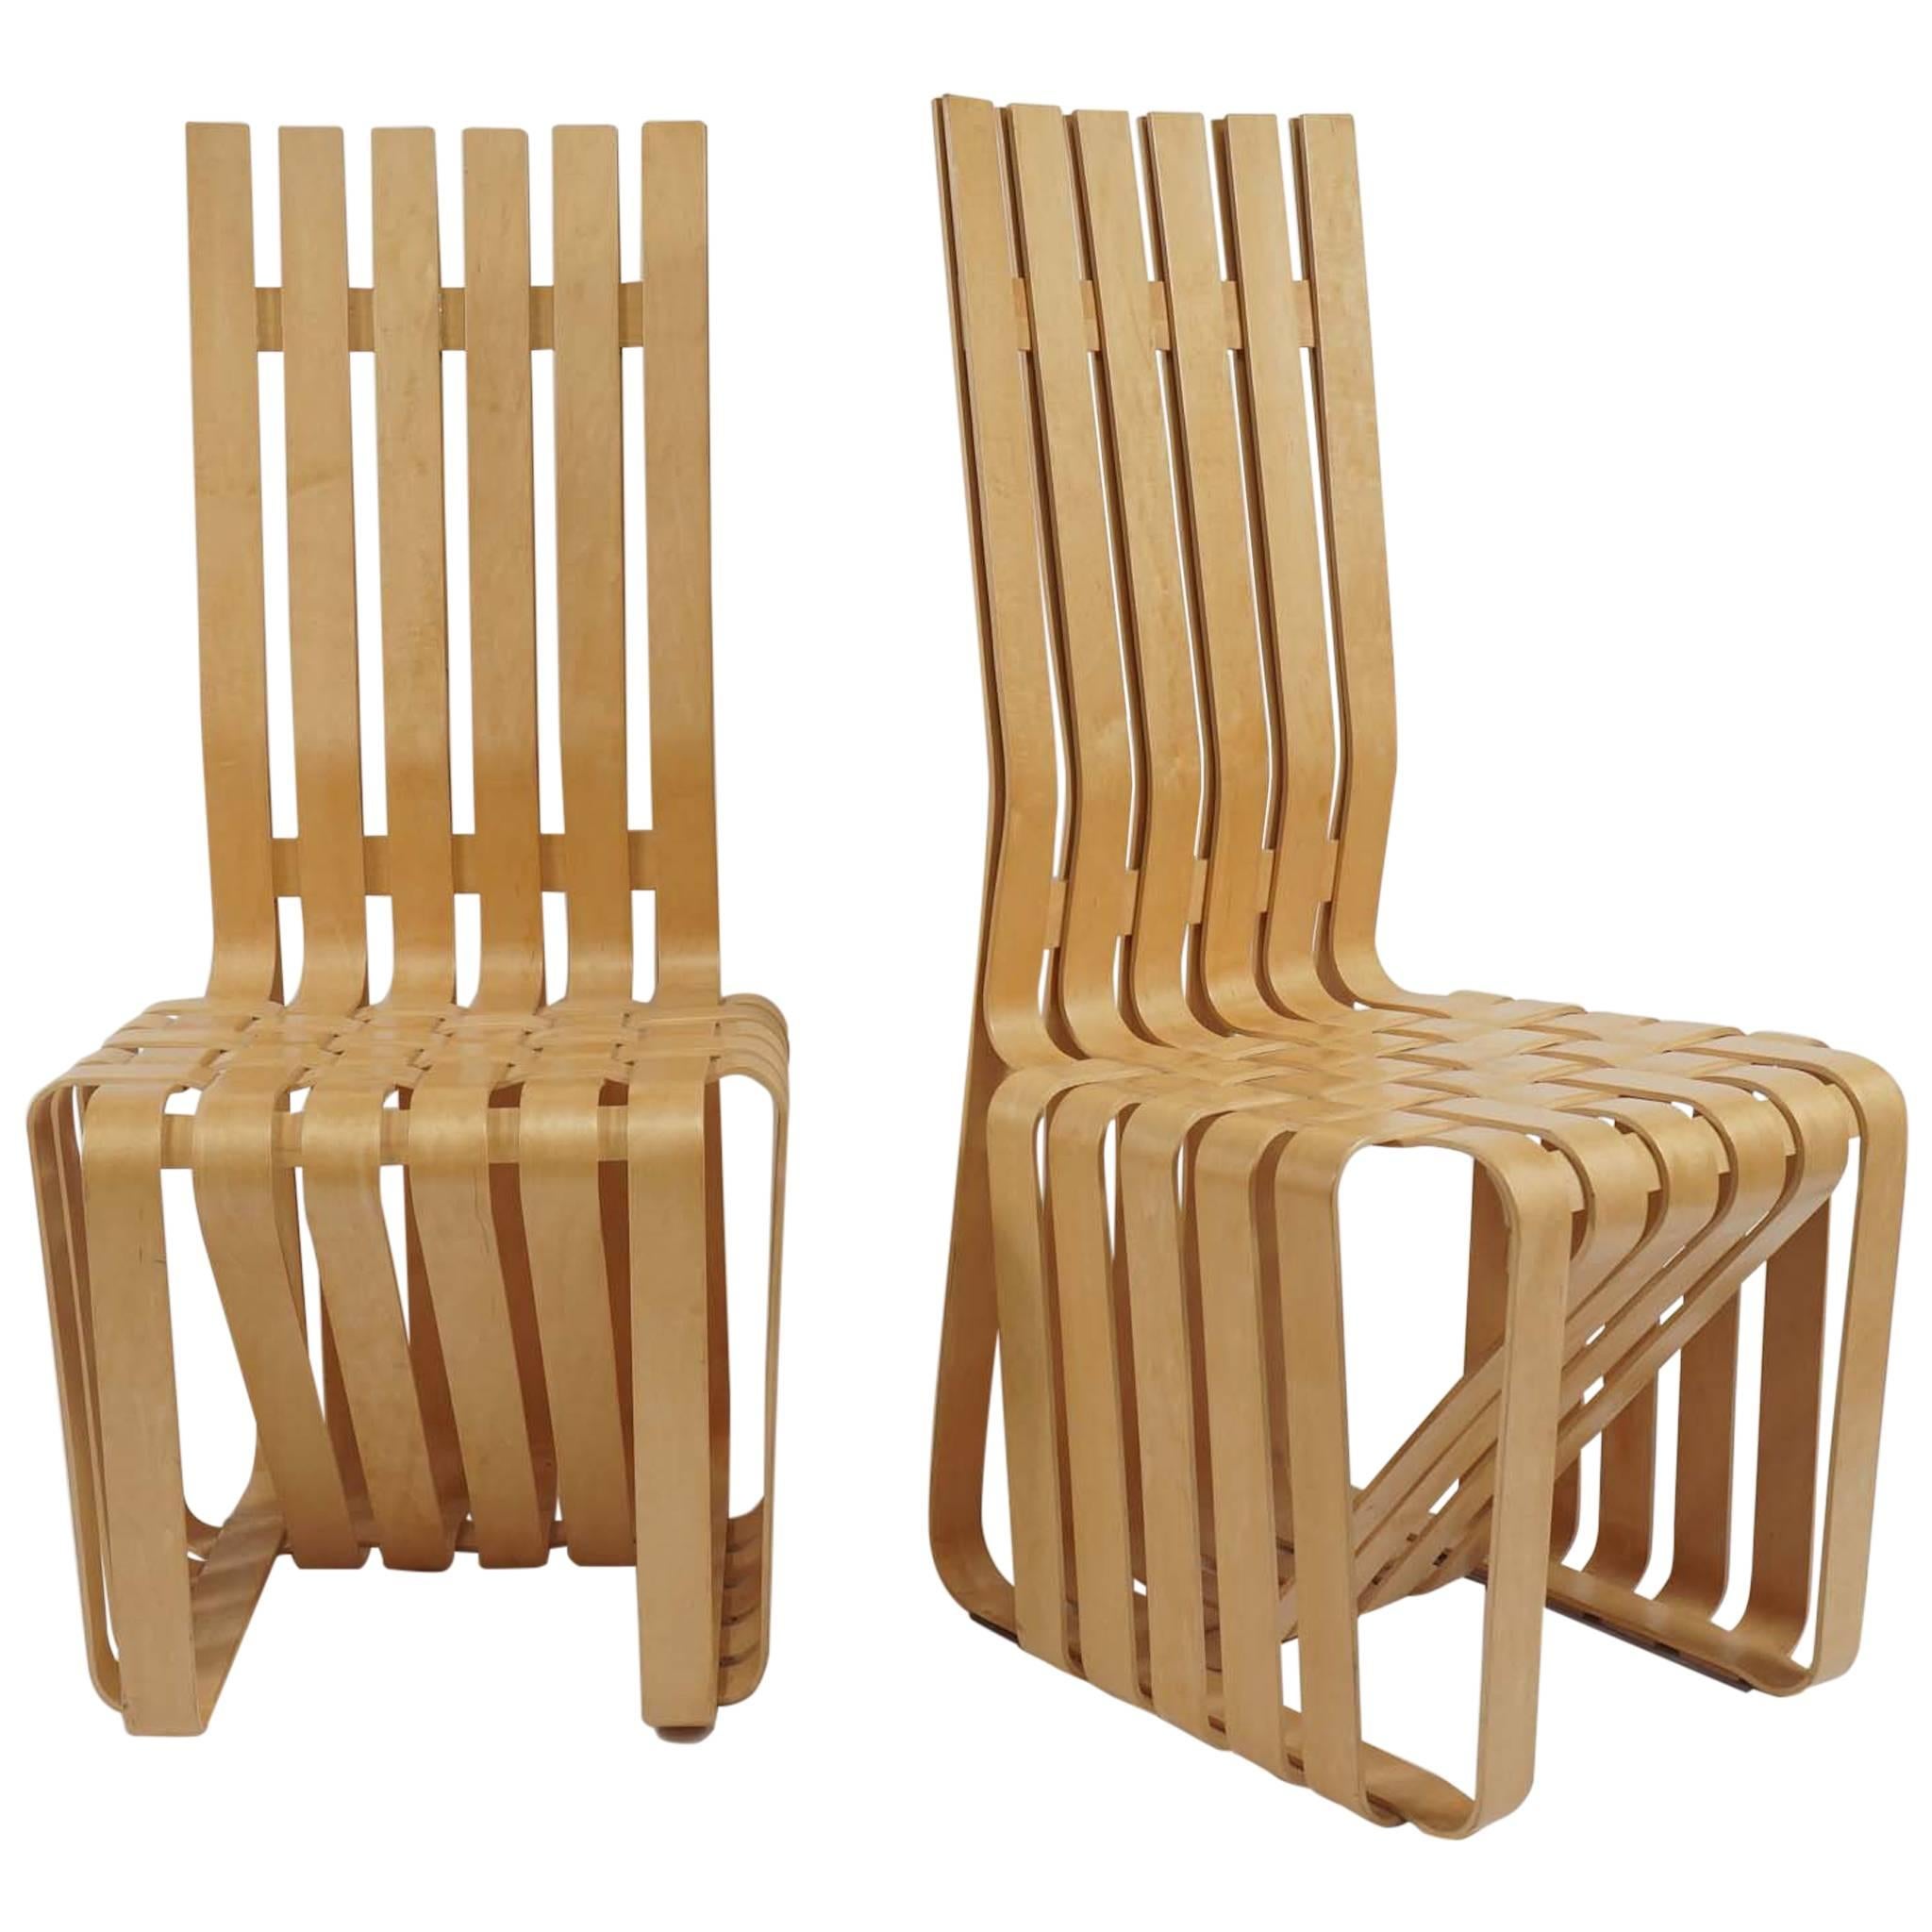 Pair of Frank Gehry "High Sticking" Chairs